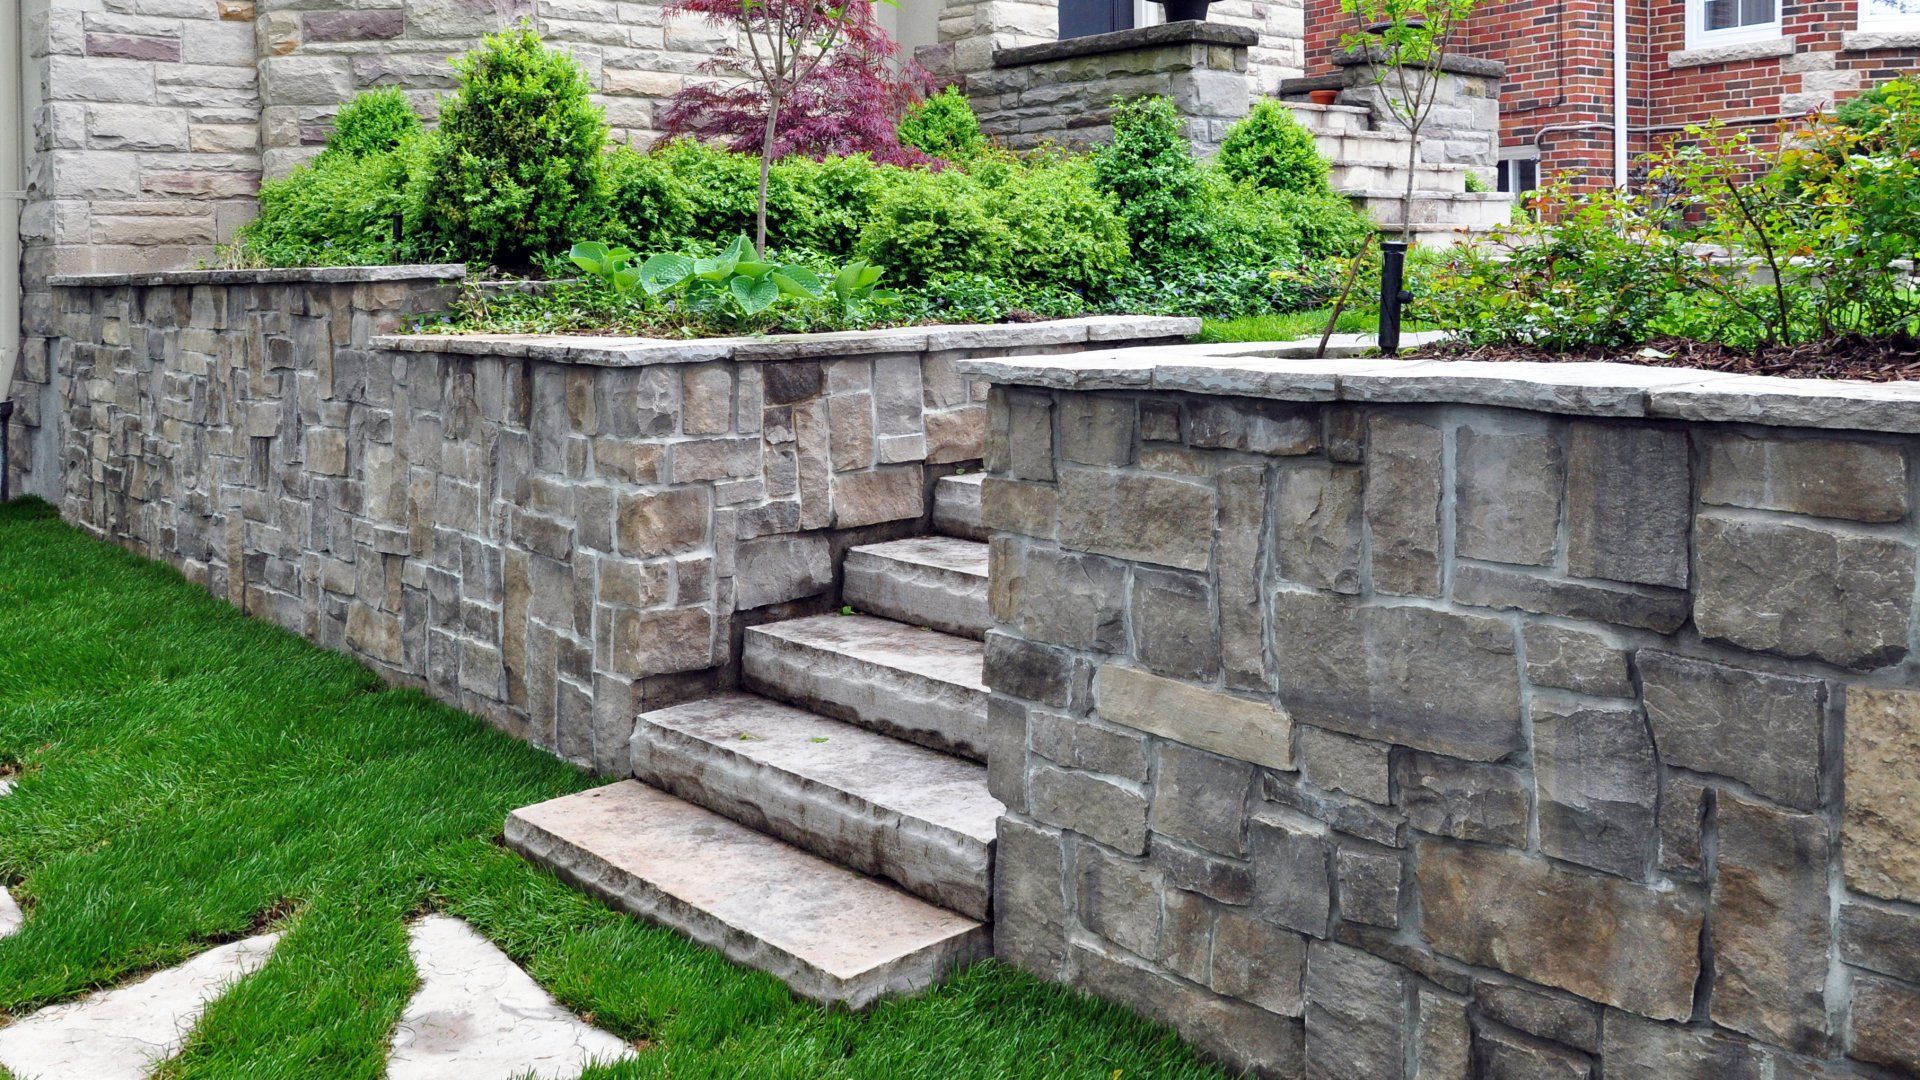 Natural stone steps and retaining wall in the garden